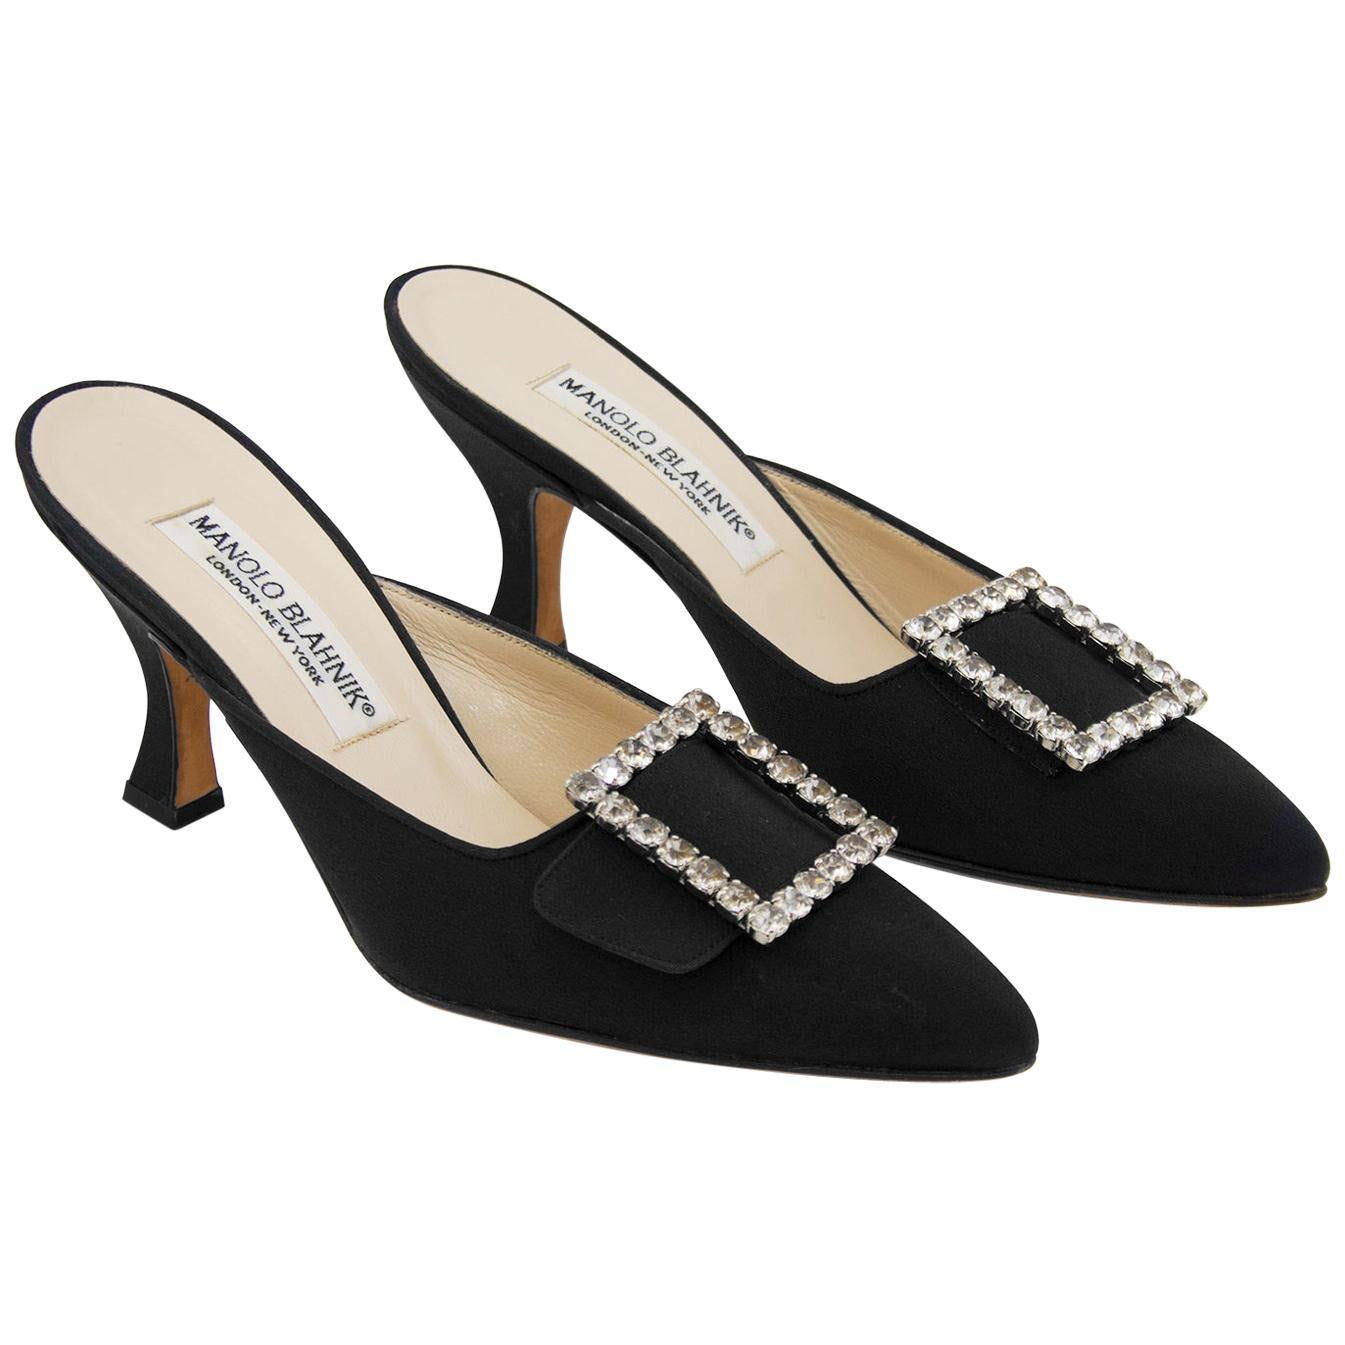 Details about   $995 NEW Manolo Blahnik JETTI CRYSTAL Jeweled Black Sandals Mules Shoes 40 